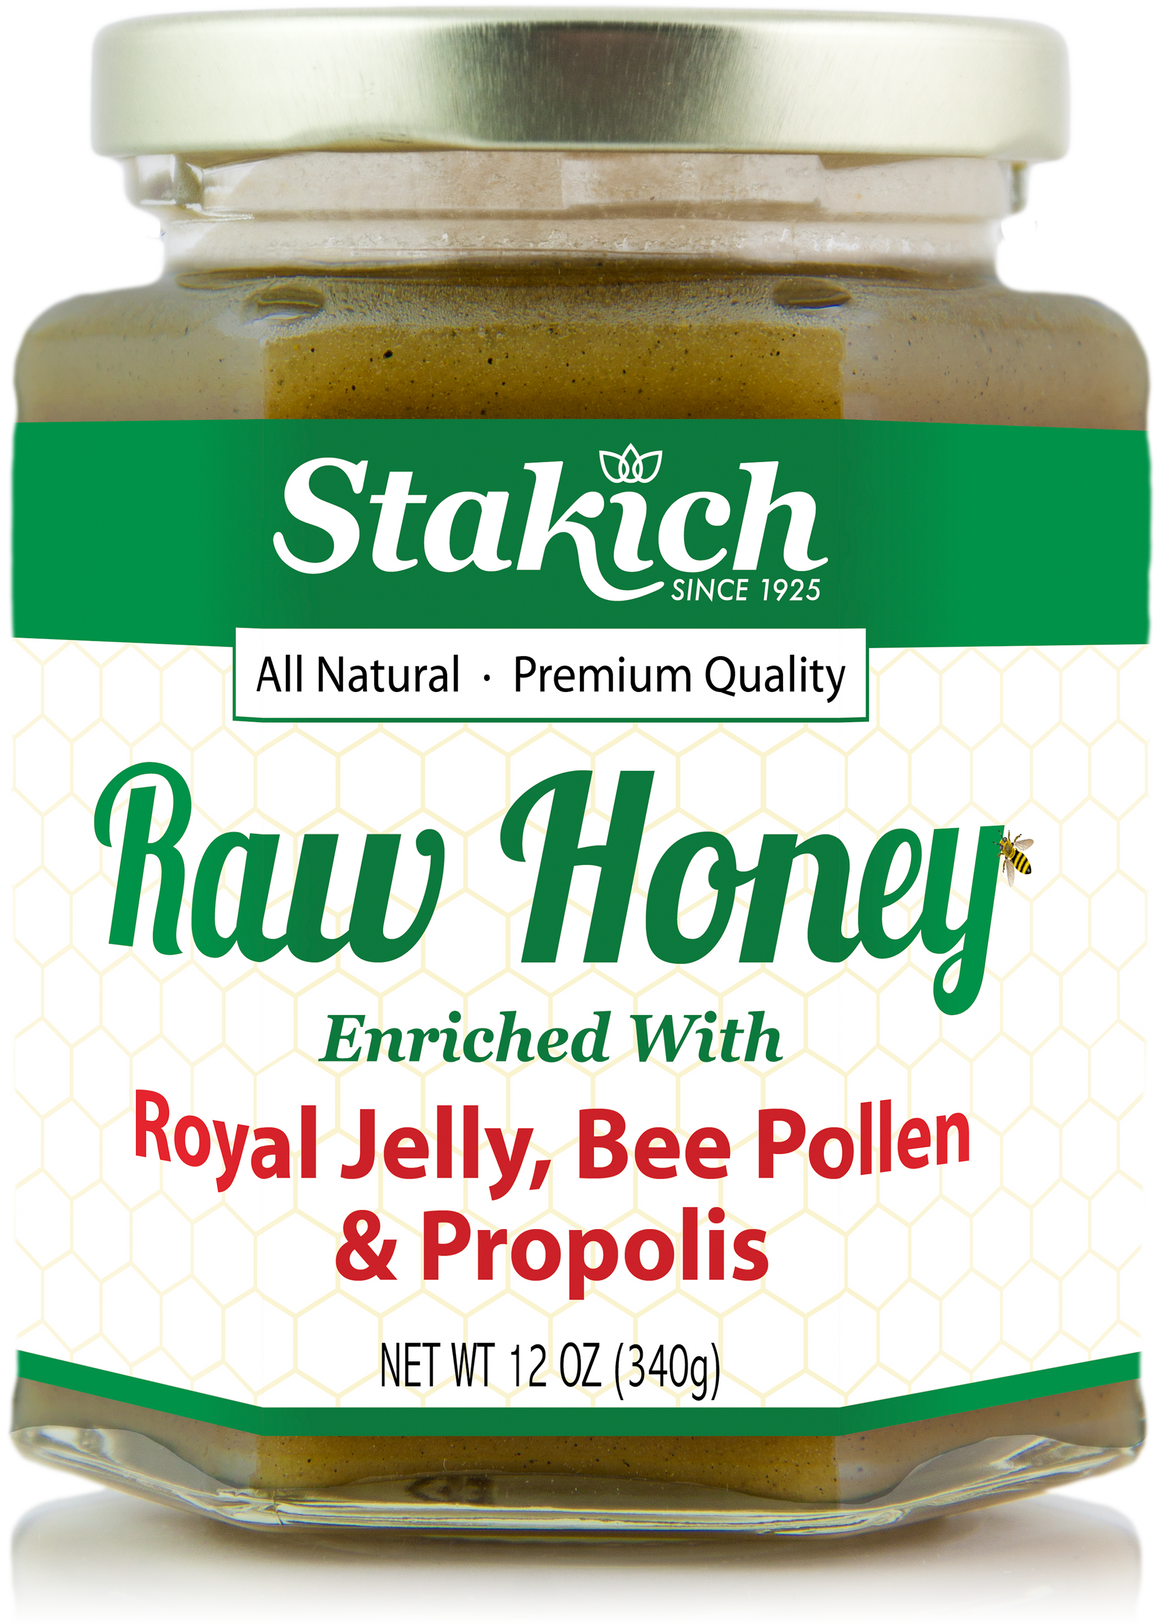 Case of Royal Jelly, Bee Pollen & Propolis Enriched Raw Honey (12 oz) - Stakich